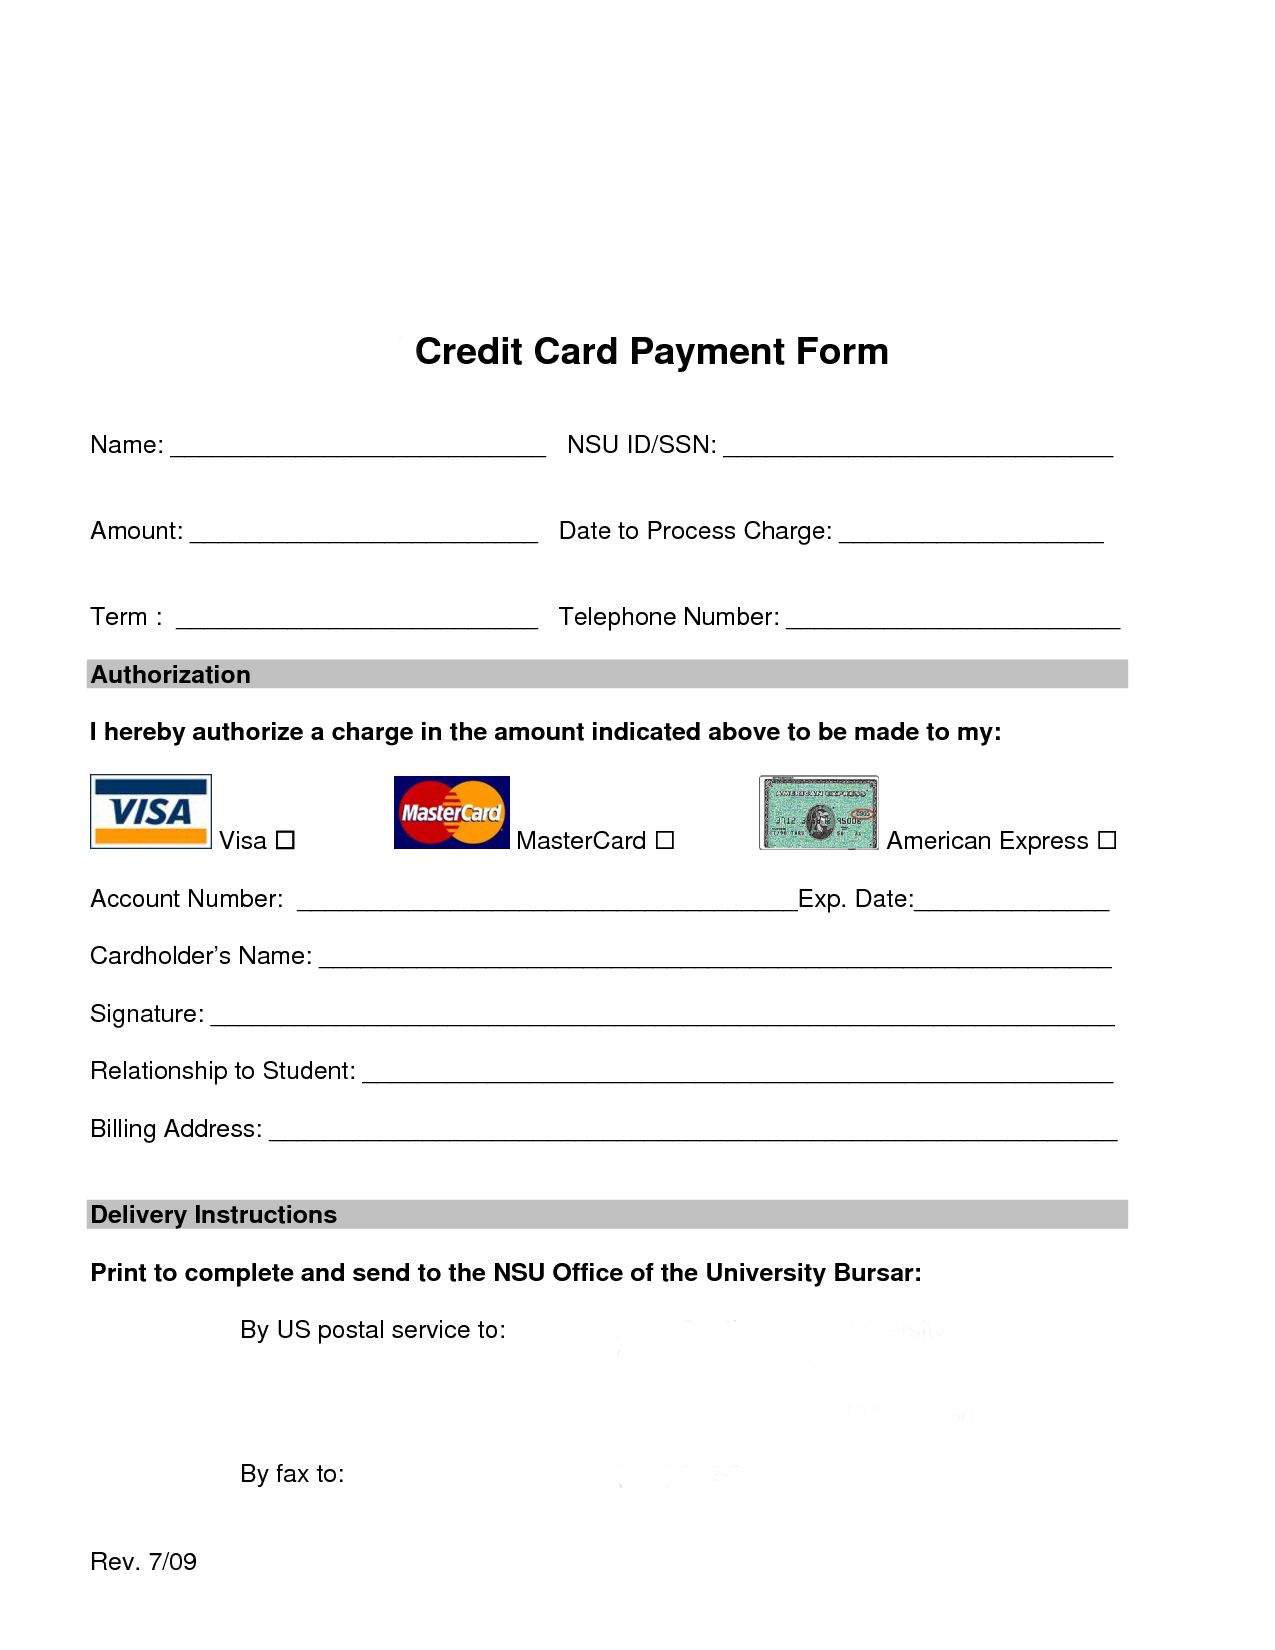 Credit Card Processing Form | Credit Card Images, Words, Web Regarding Credit Card Payment Slip Template